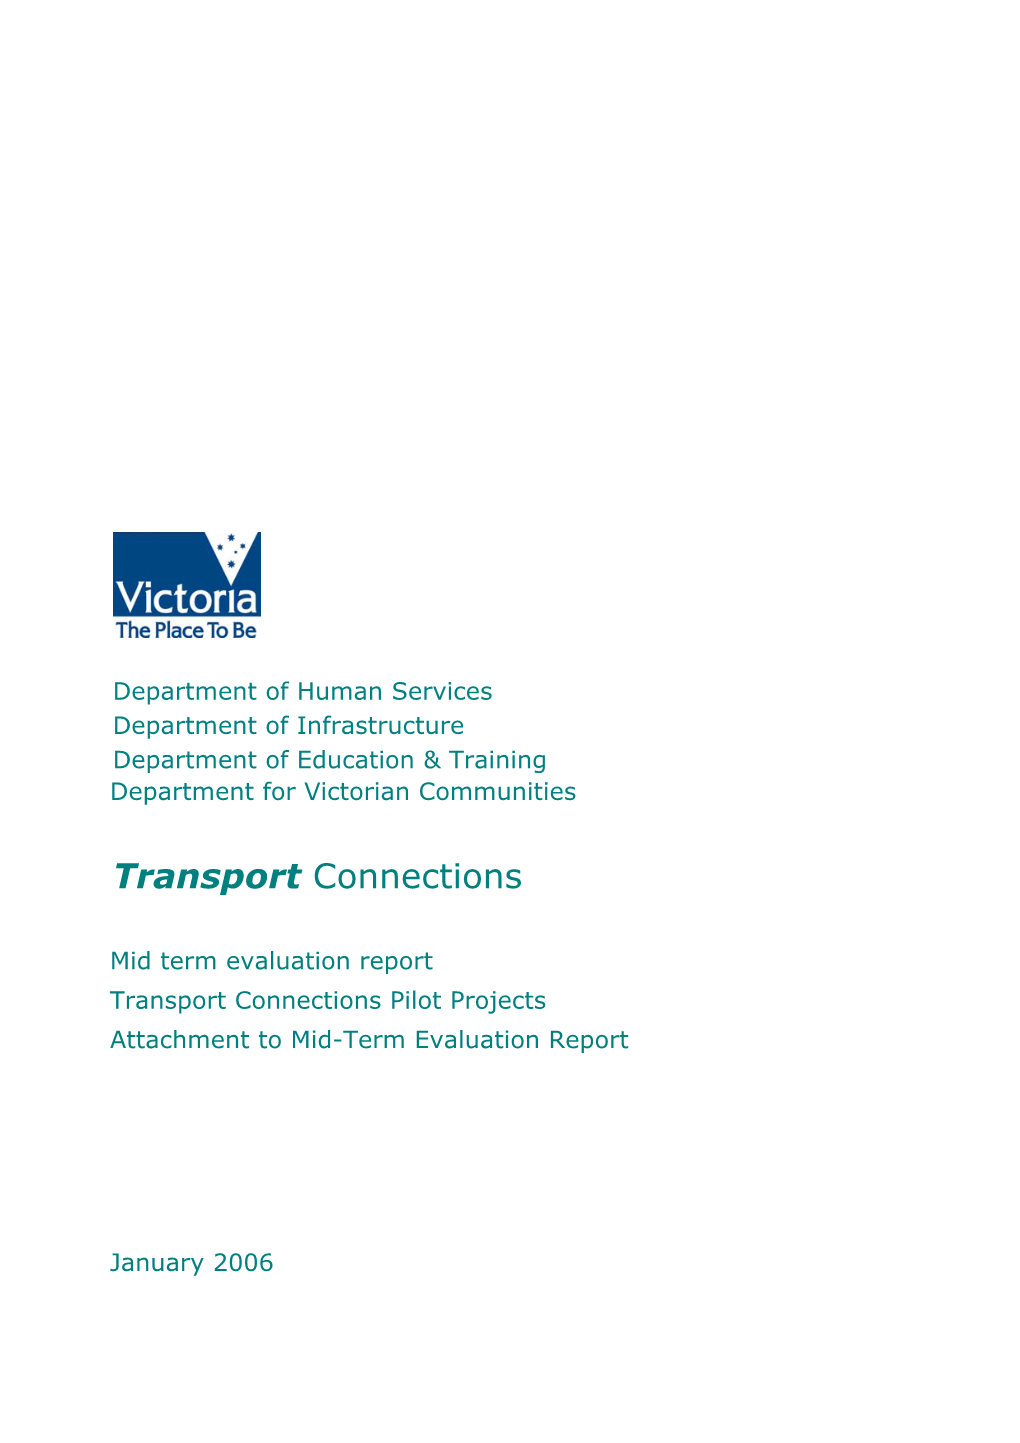 Transport Connections Pilot Projects Attachment to Mid-Term Evaluation Report